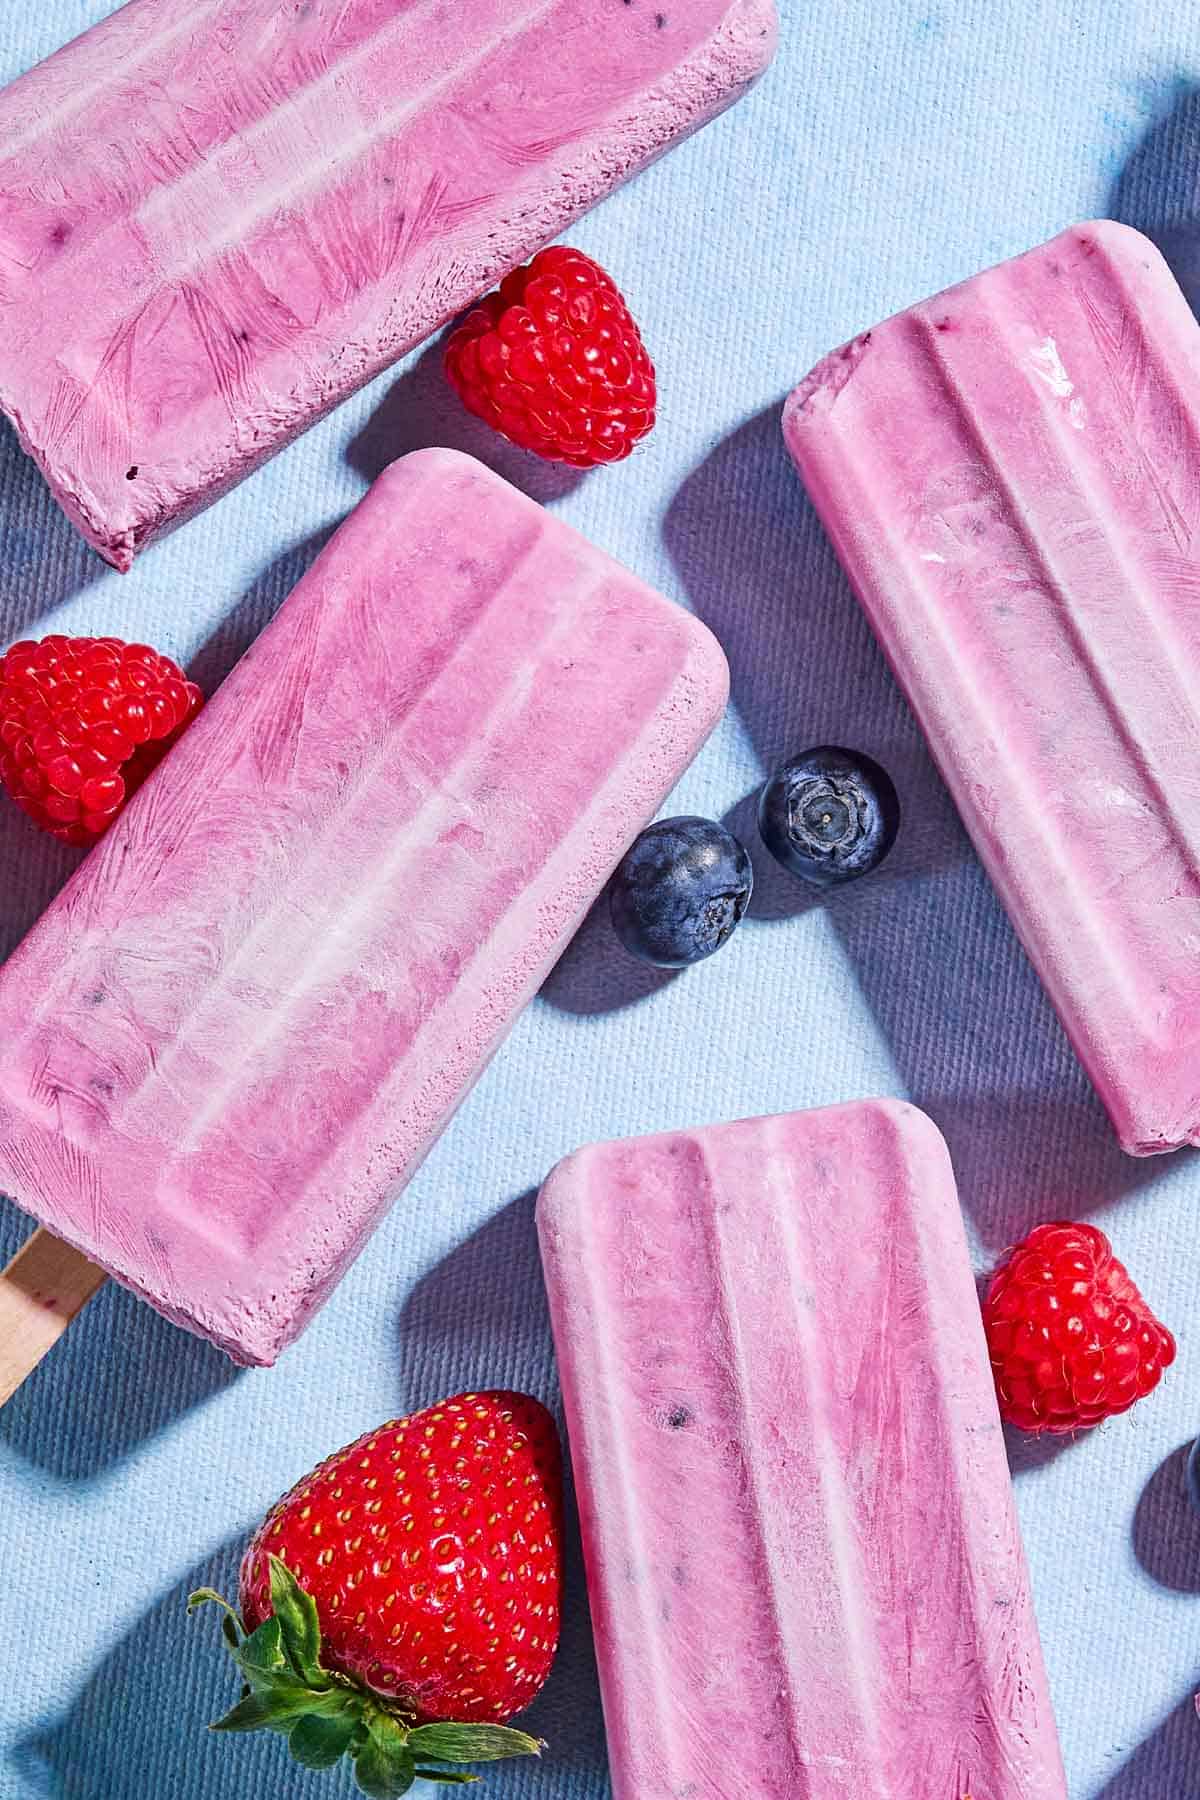 An overhead close up photo of 4 yogurt berry homemade popsicles surrounded by blueberries, strawberries and raspberries.